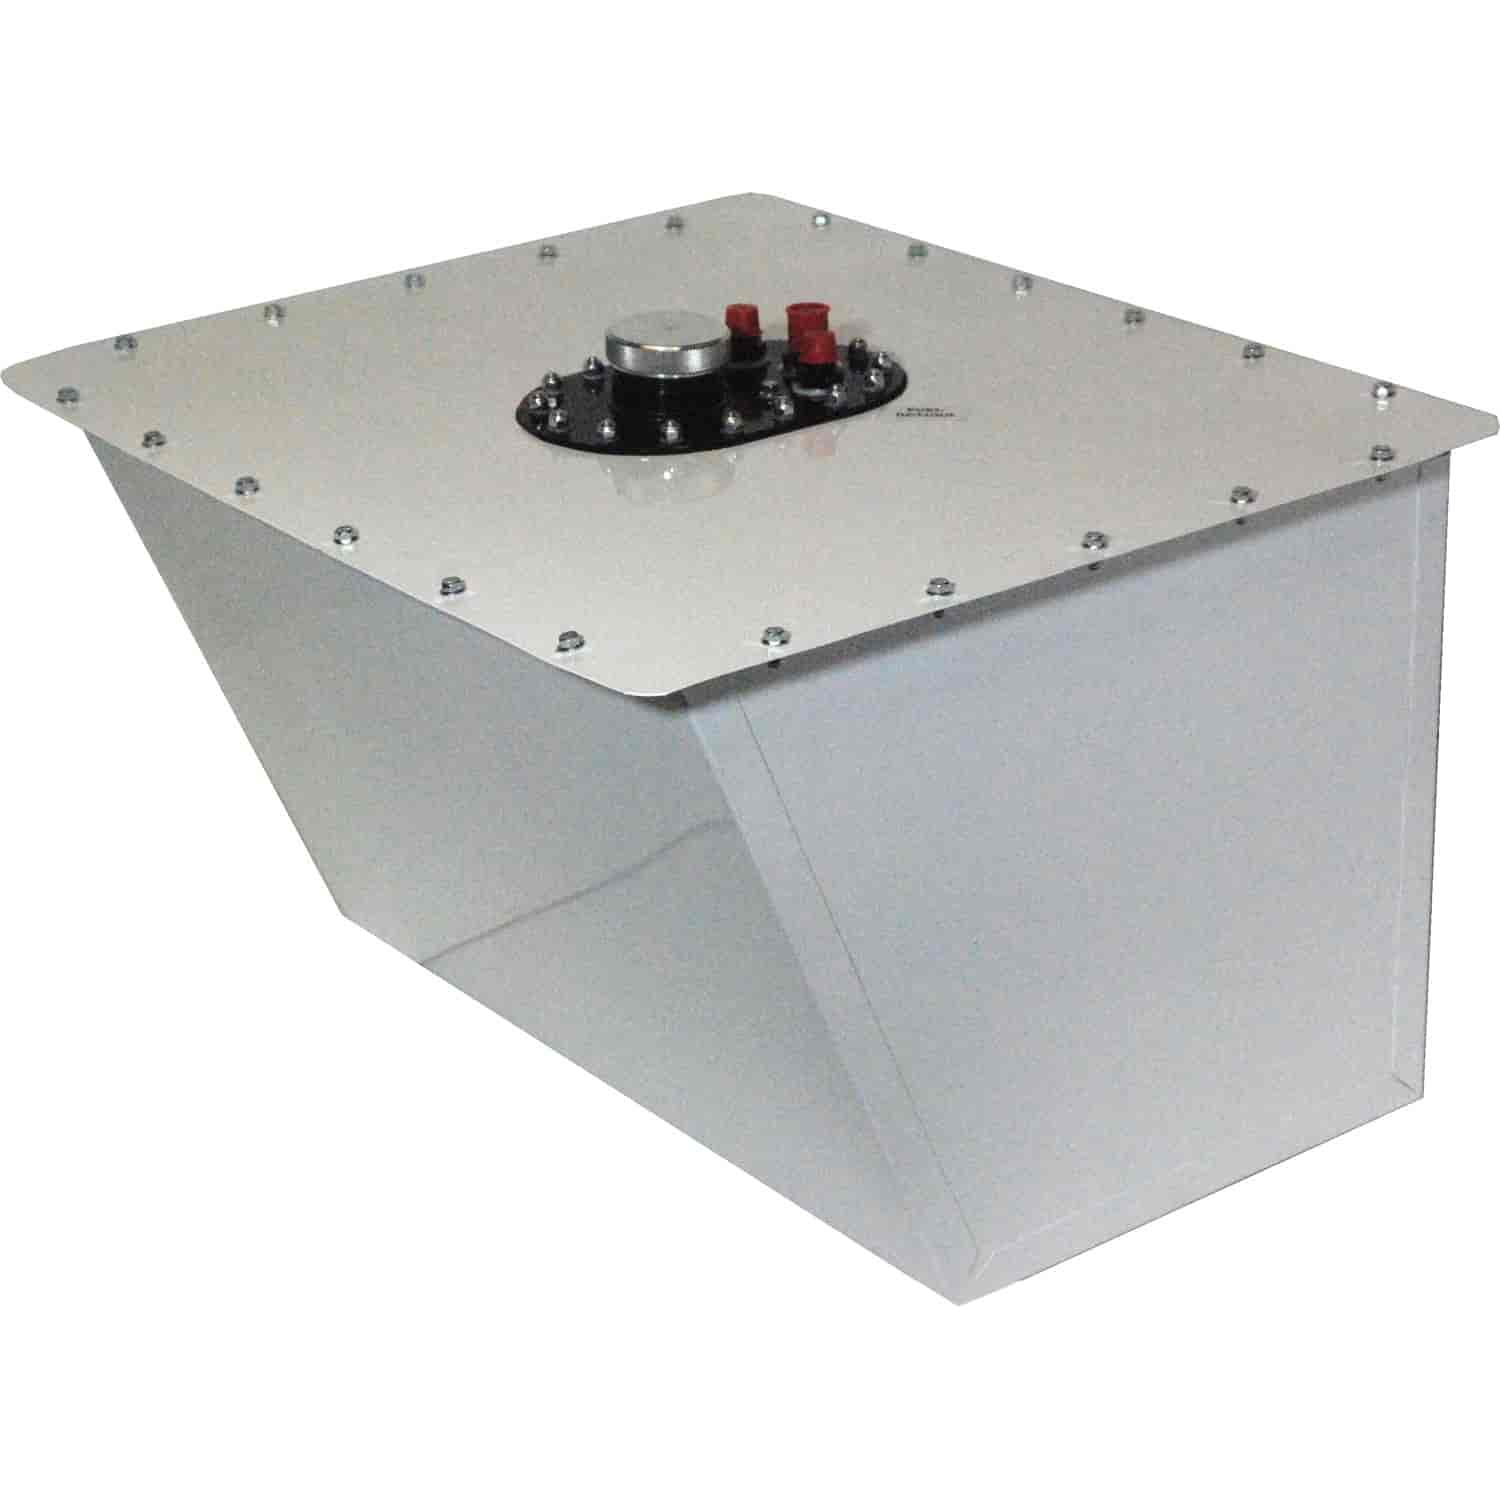 Wedge Steel Fuel Cell Dimensions: Length Top: 23"